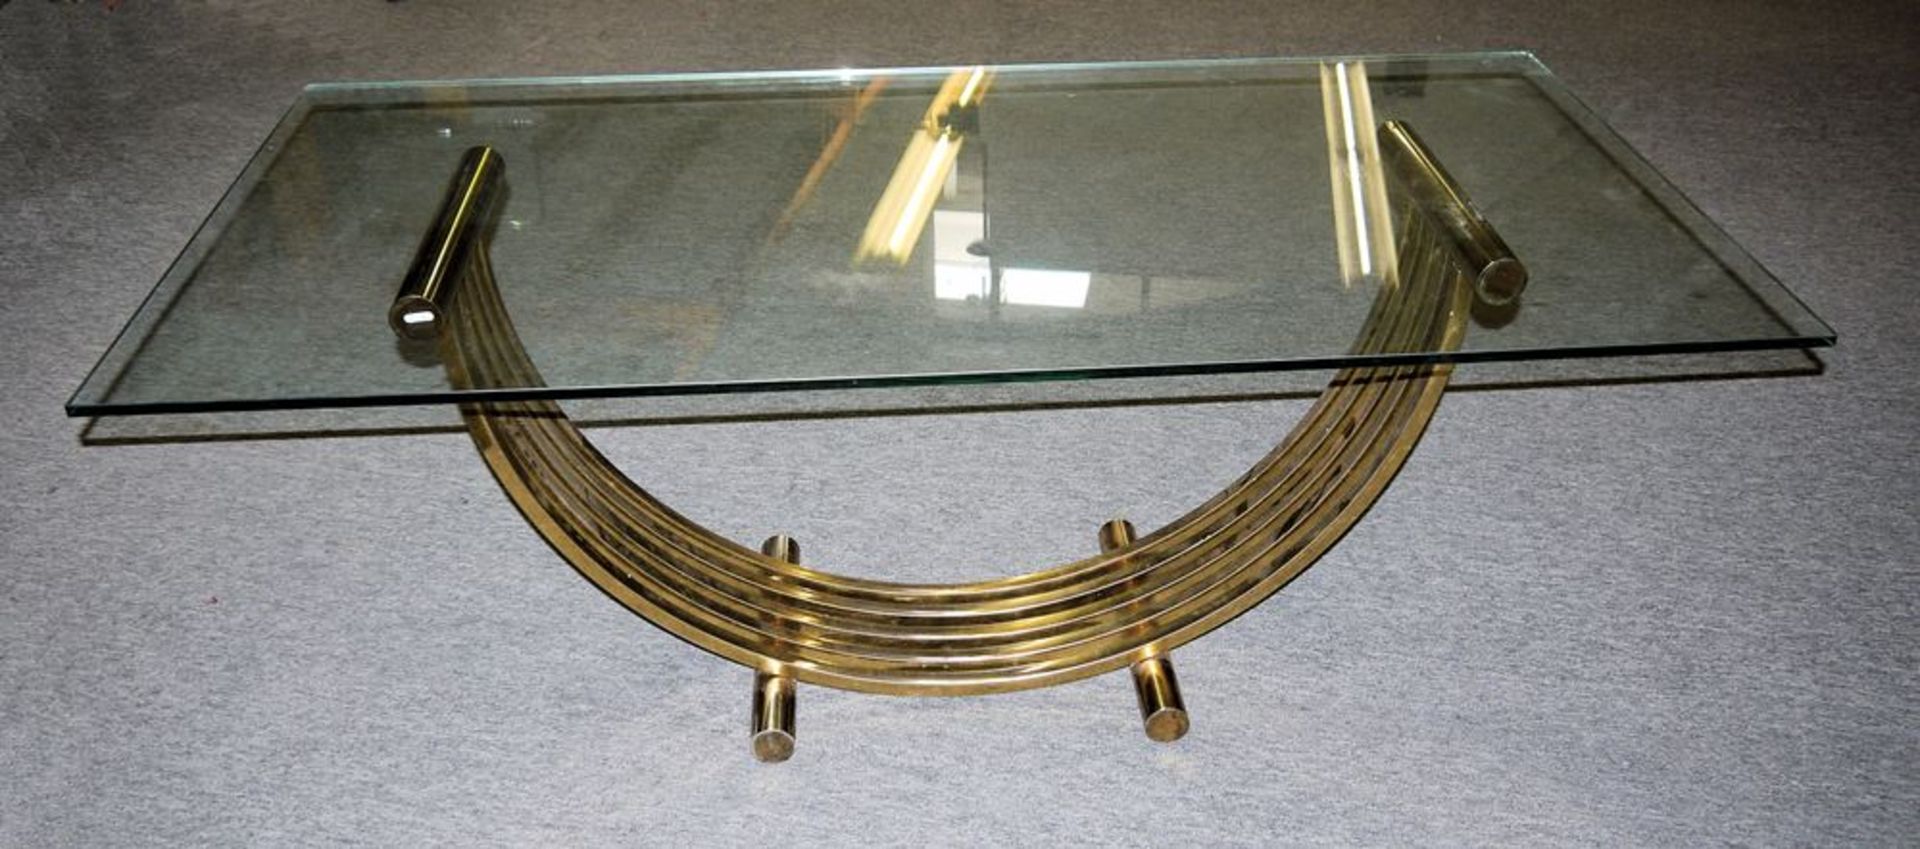 Repräsentative writing, dining or console table by Romeo Rega, Italy 1970s